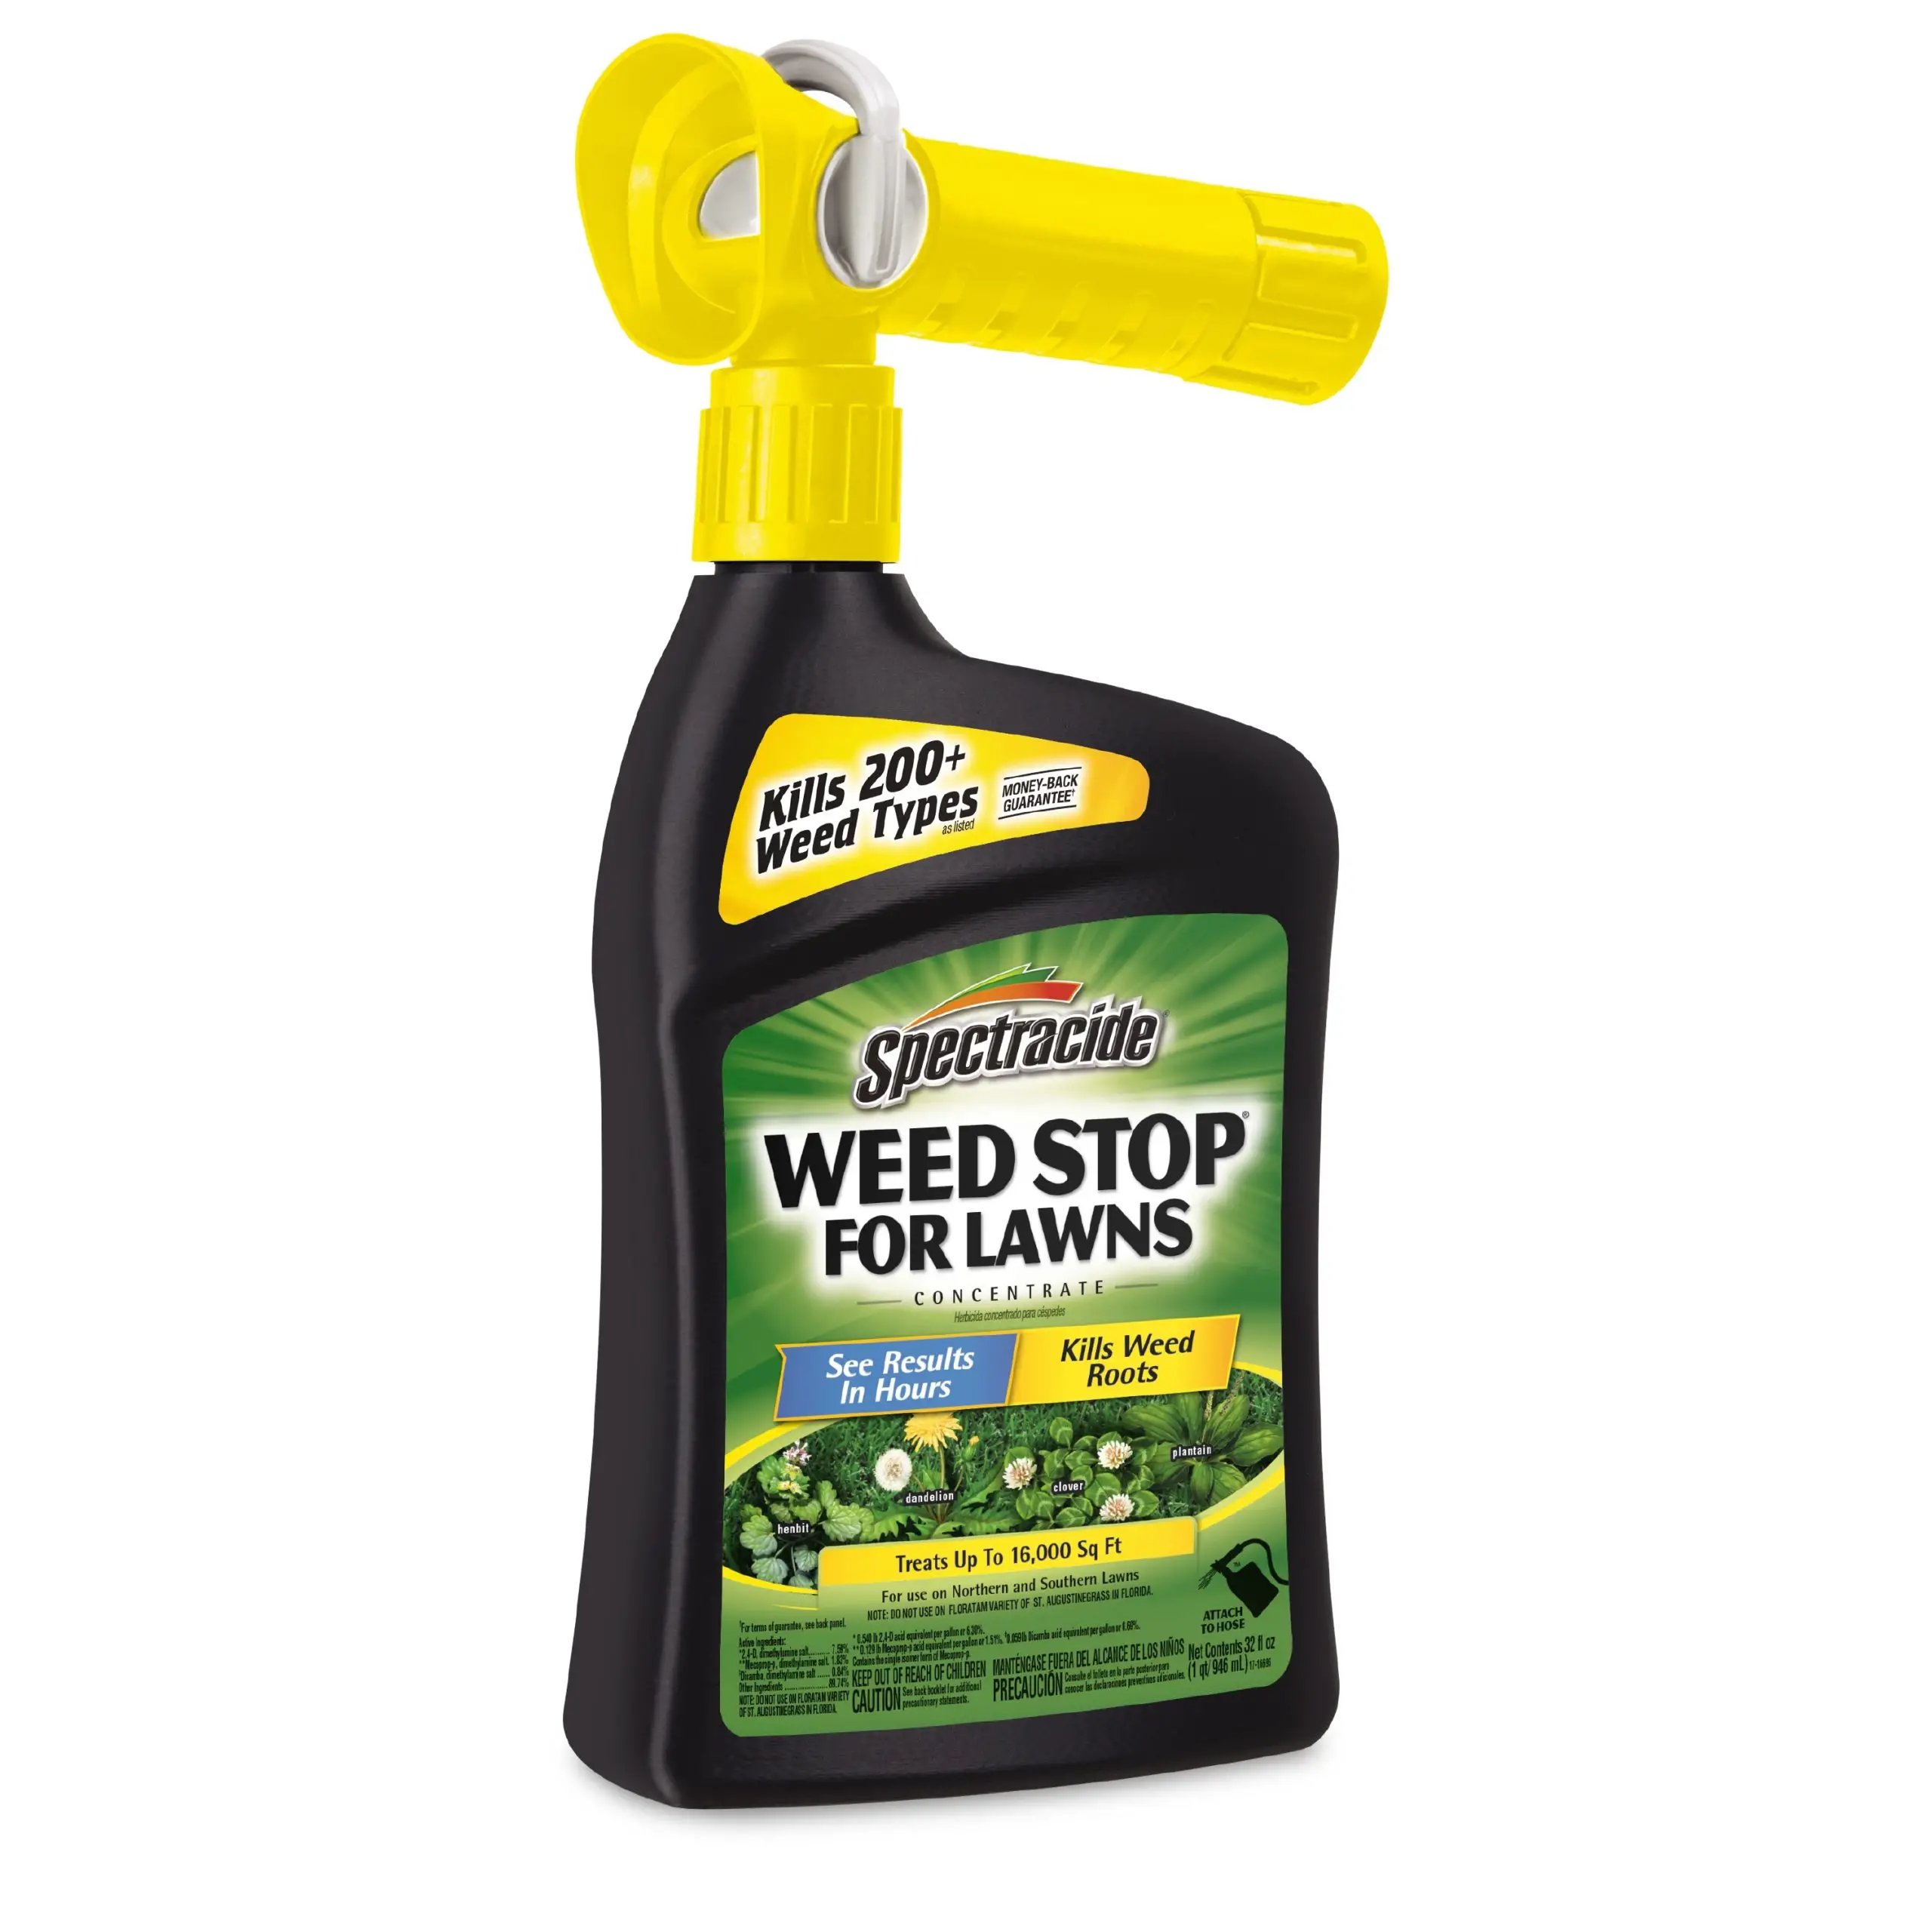 Spectracide Weed Stop For Lawns Concentrate, Ready